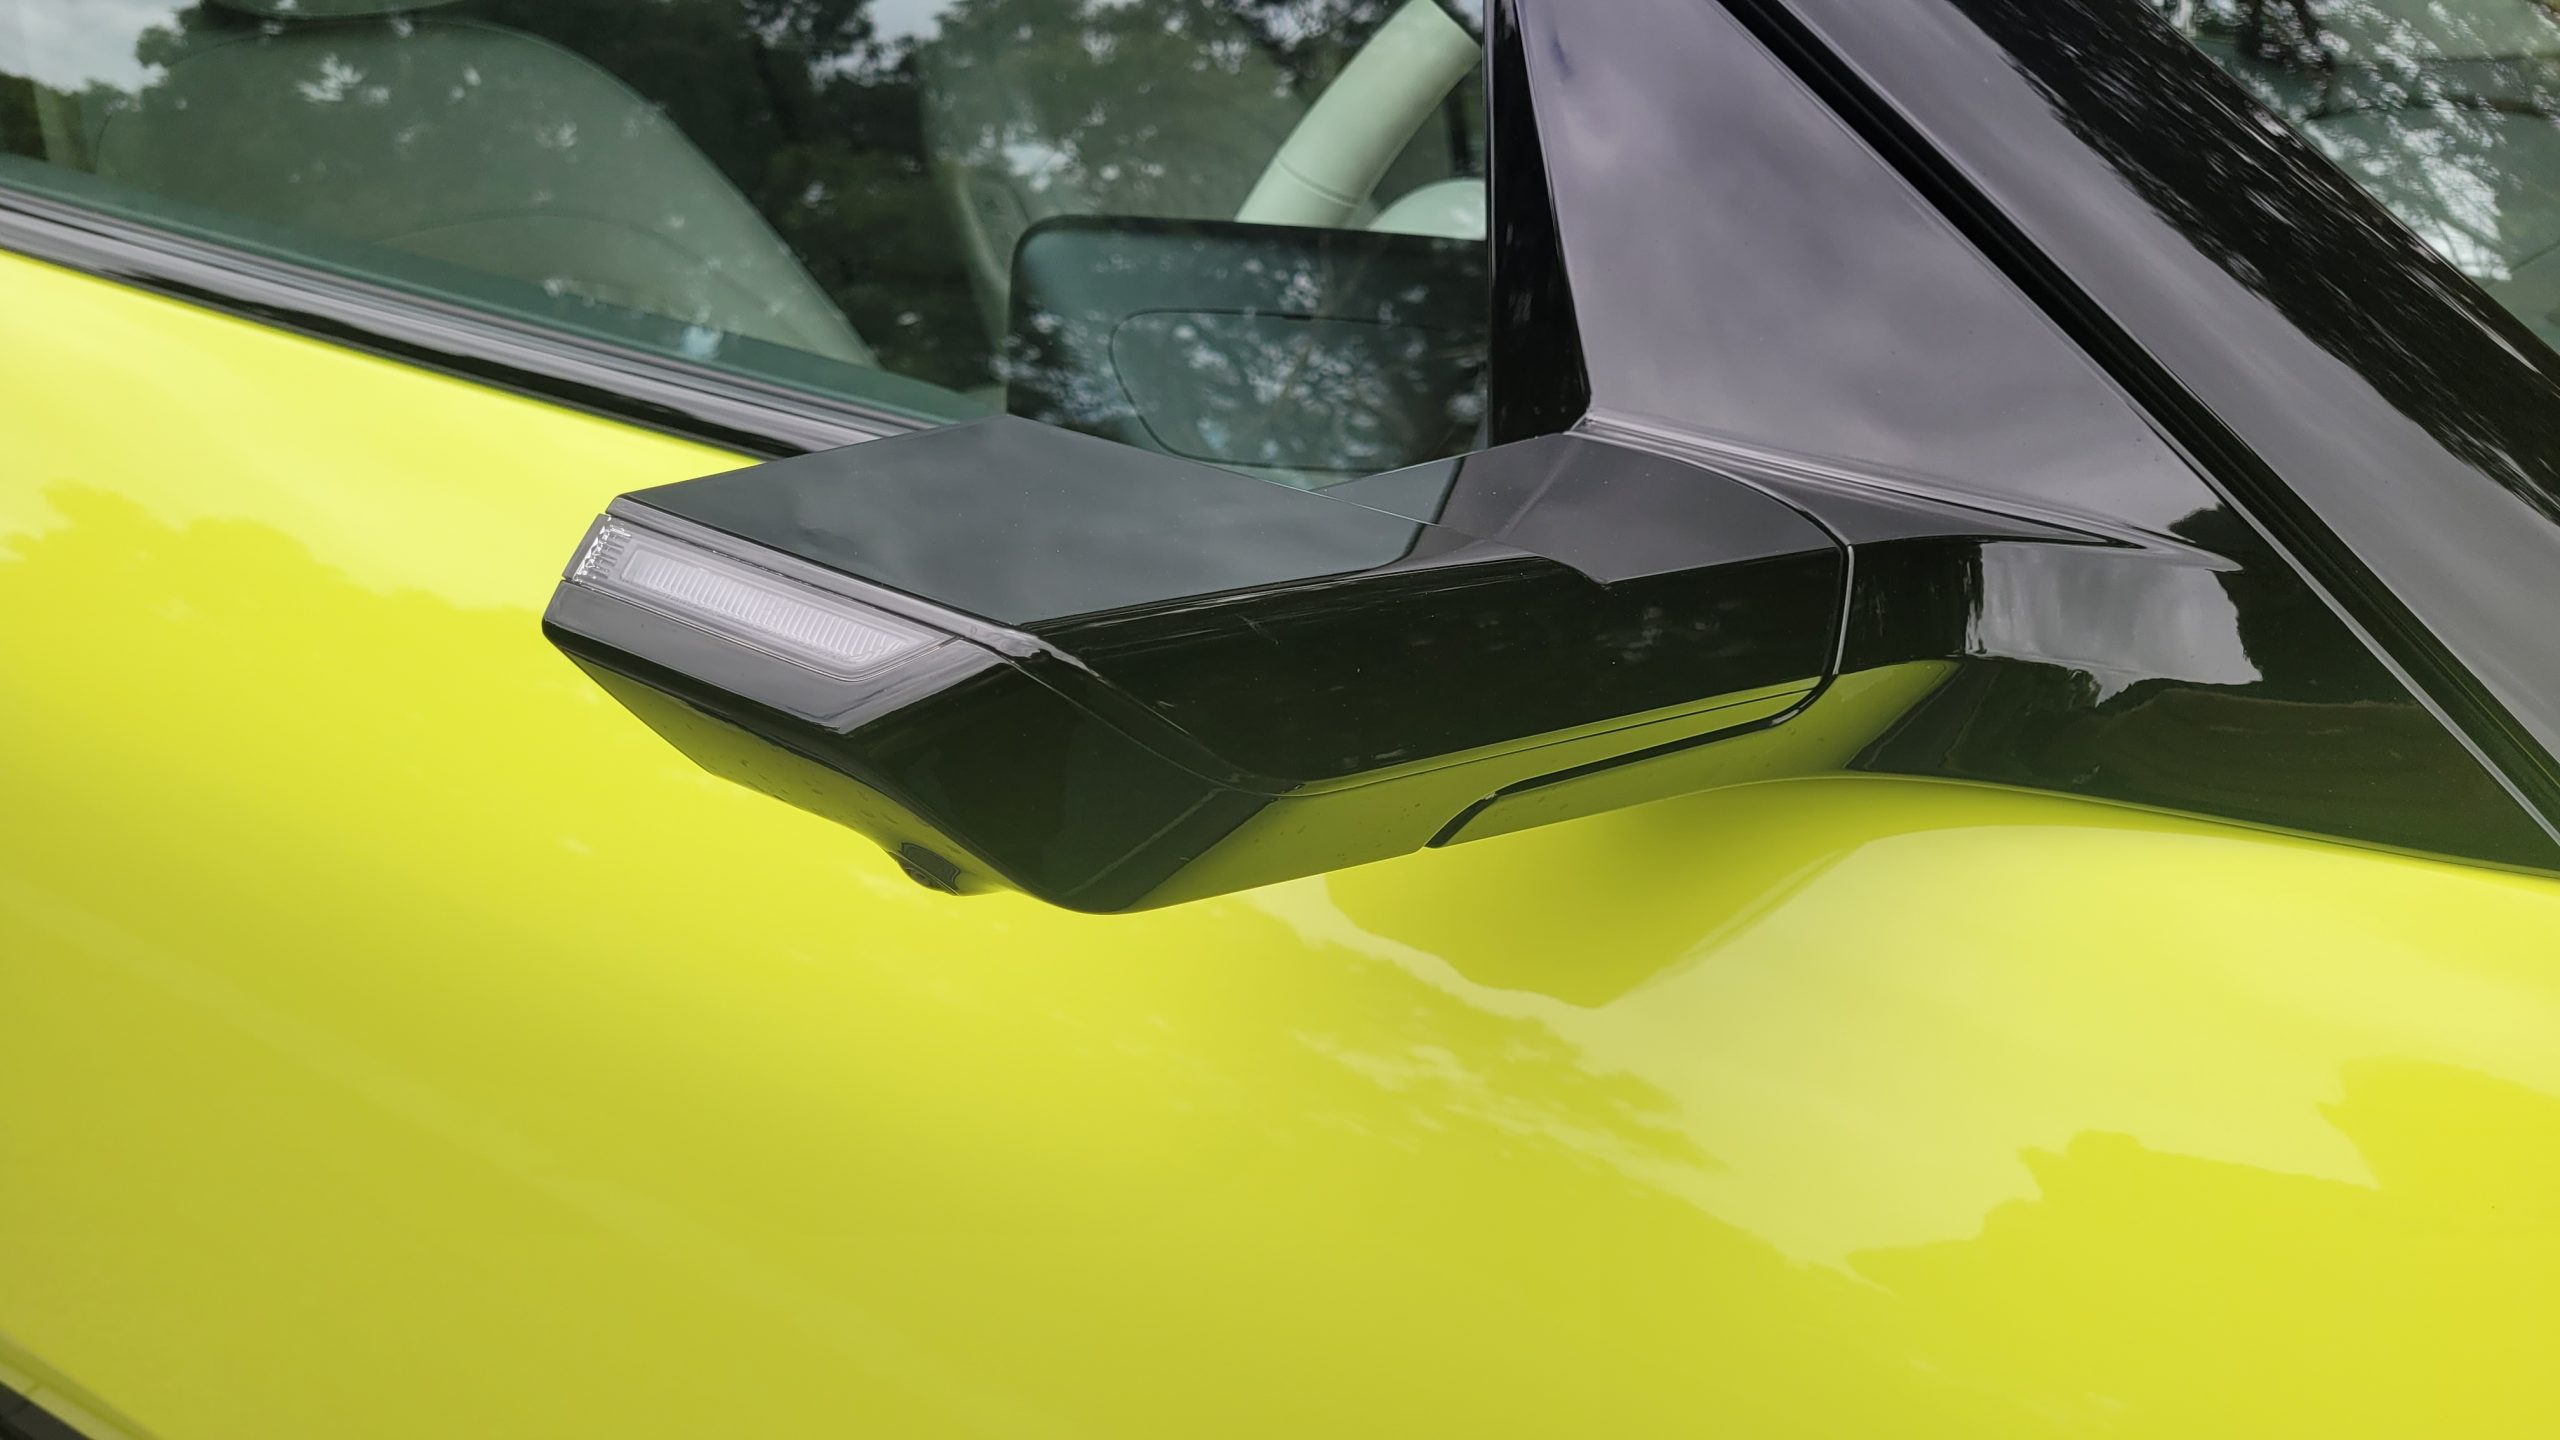 Sao Paulo Lime green Genesis GV60 has cameras to view the side rear view instead of mirrors